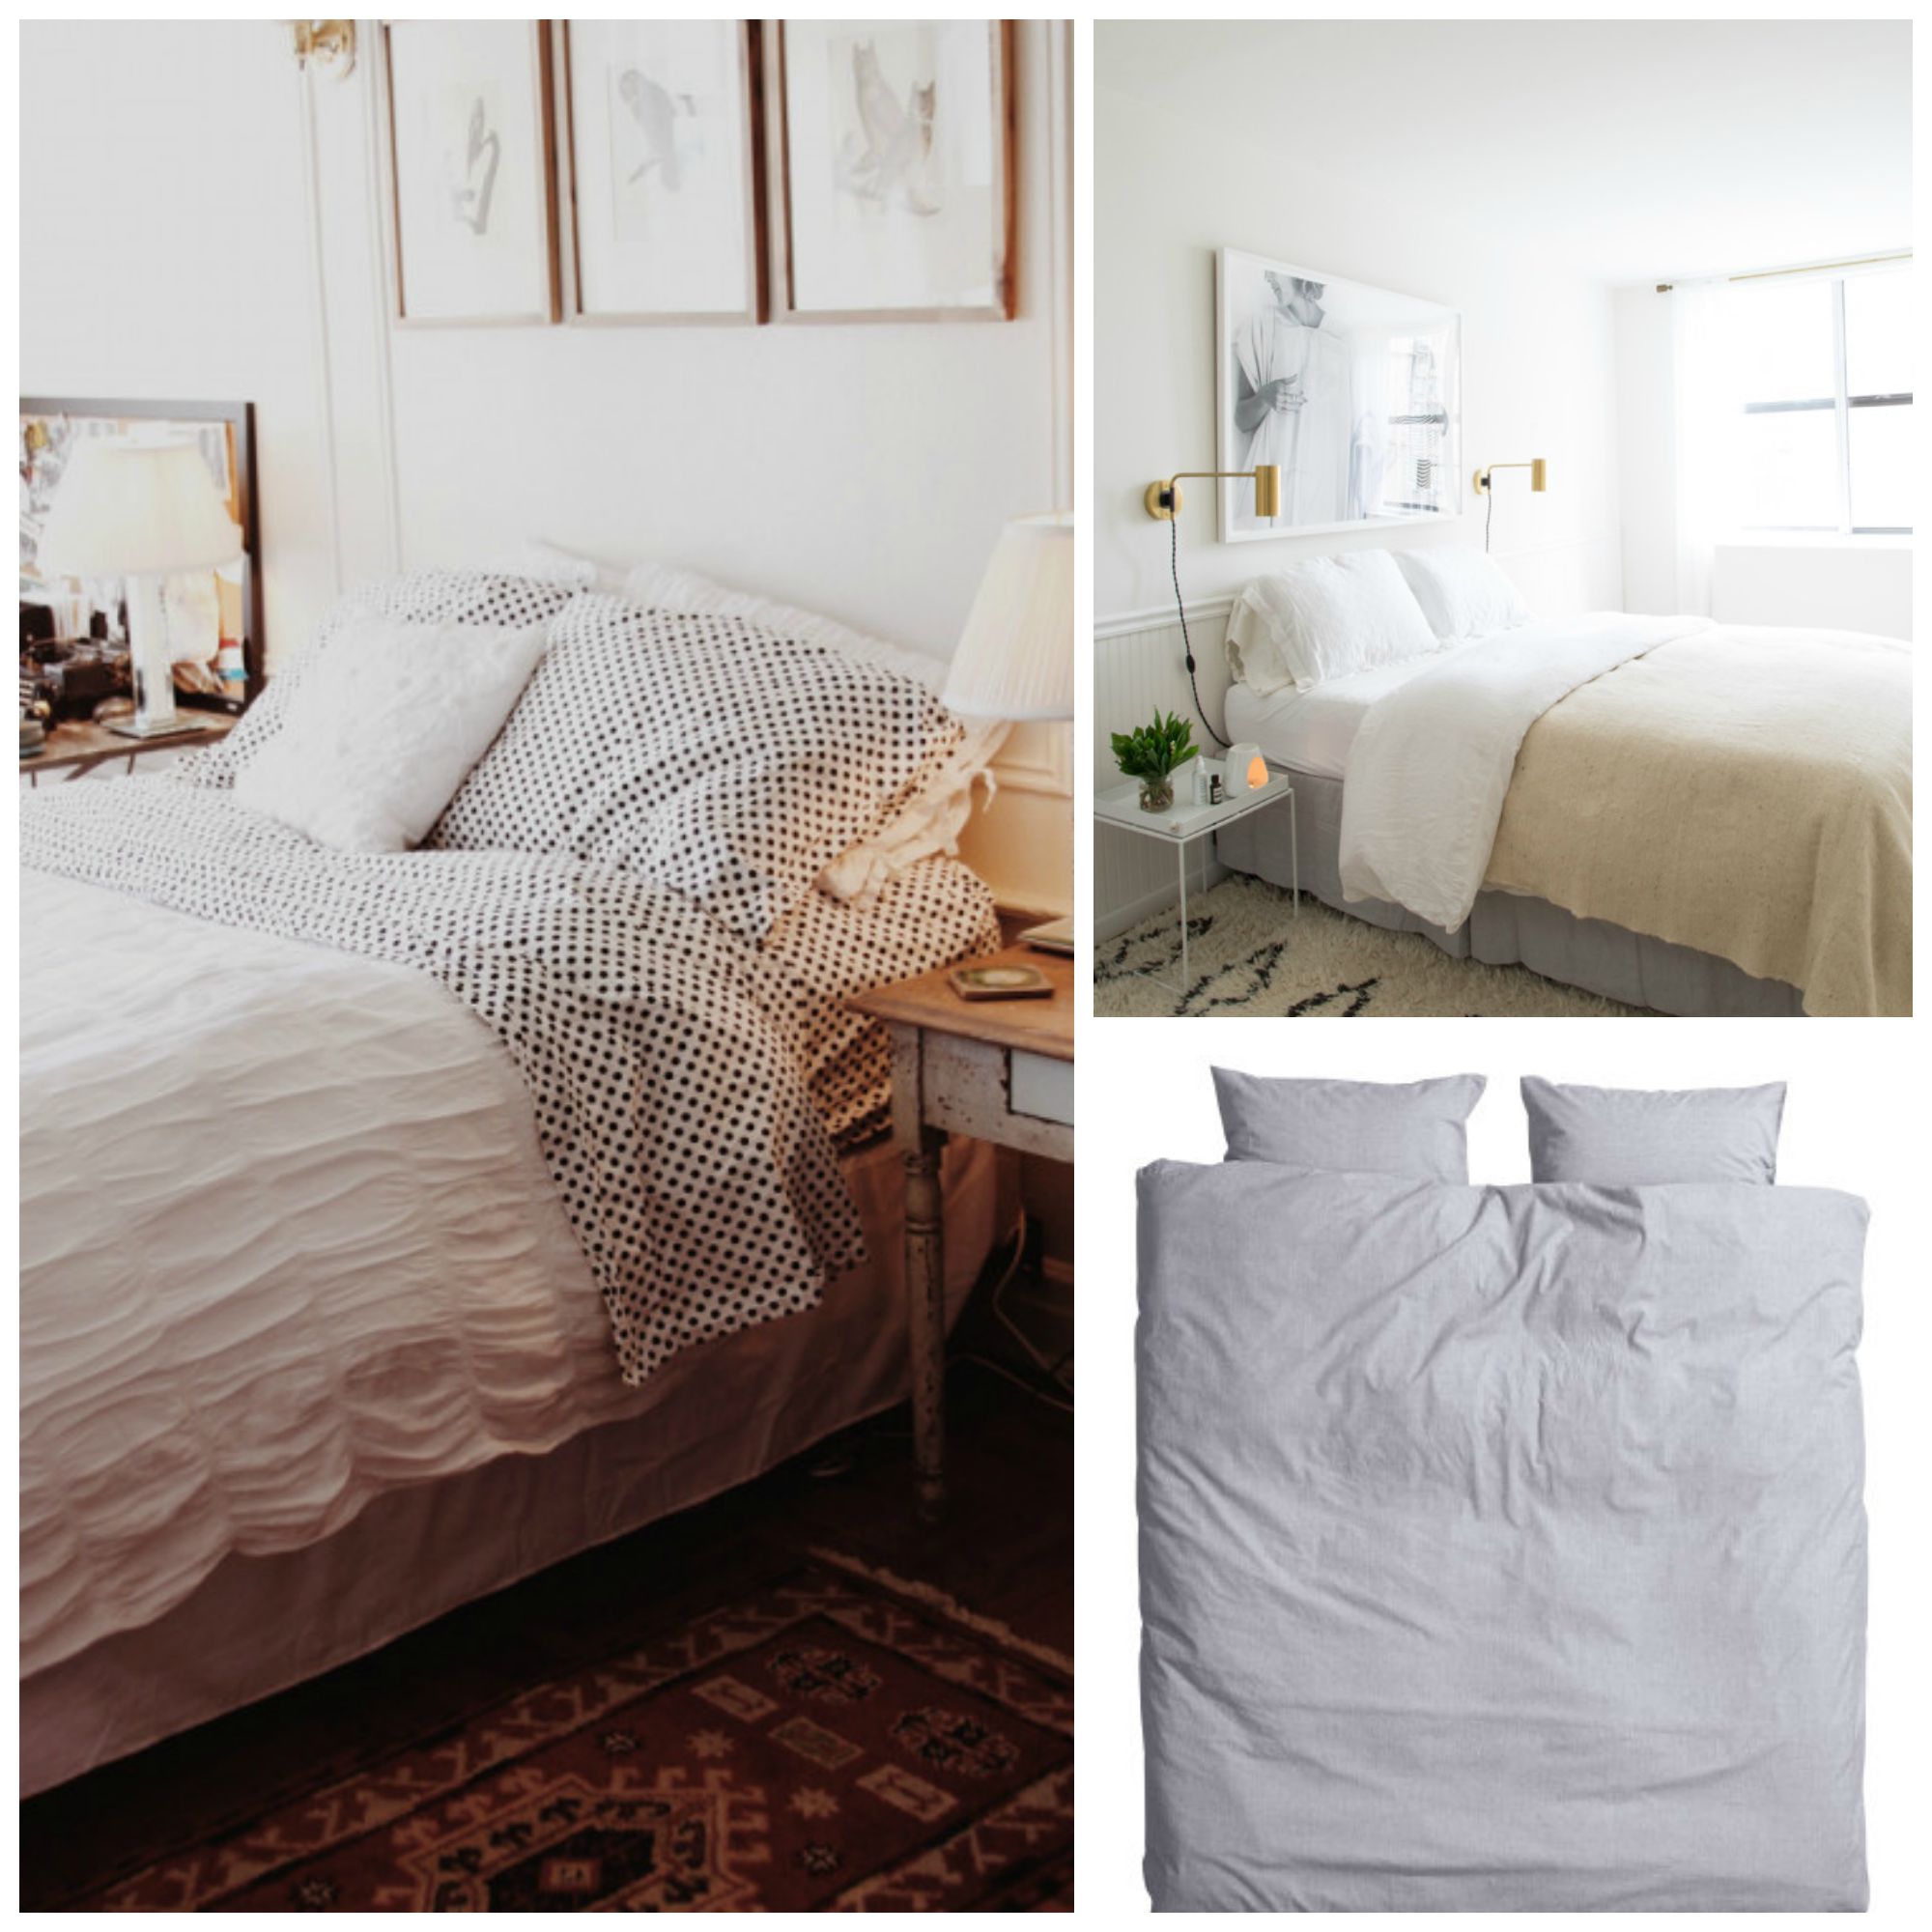 Bedroom inspiration - bedding and duvets | Neutral and light, dark and moody, colorful or filled with pattern... What is your favored style for the bedroom? Click through to read the full post on style inspiration for the bedroom.